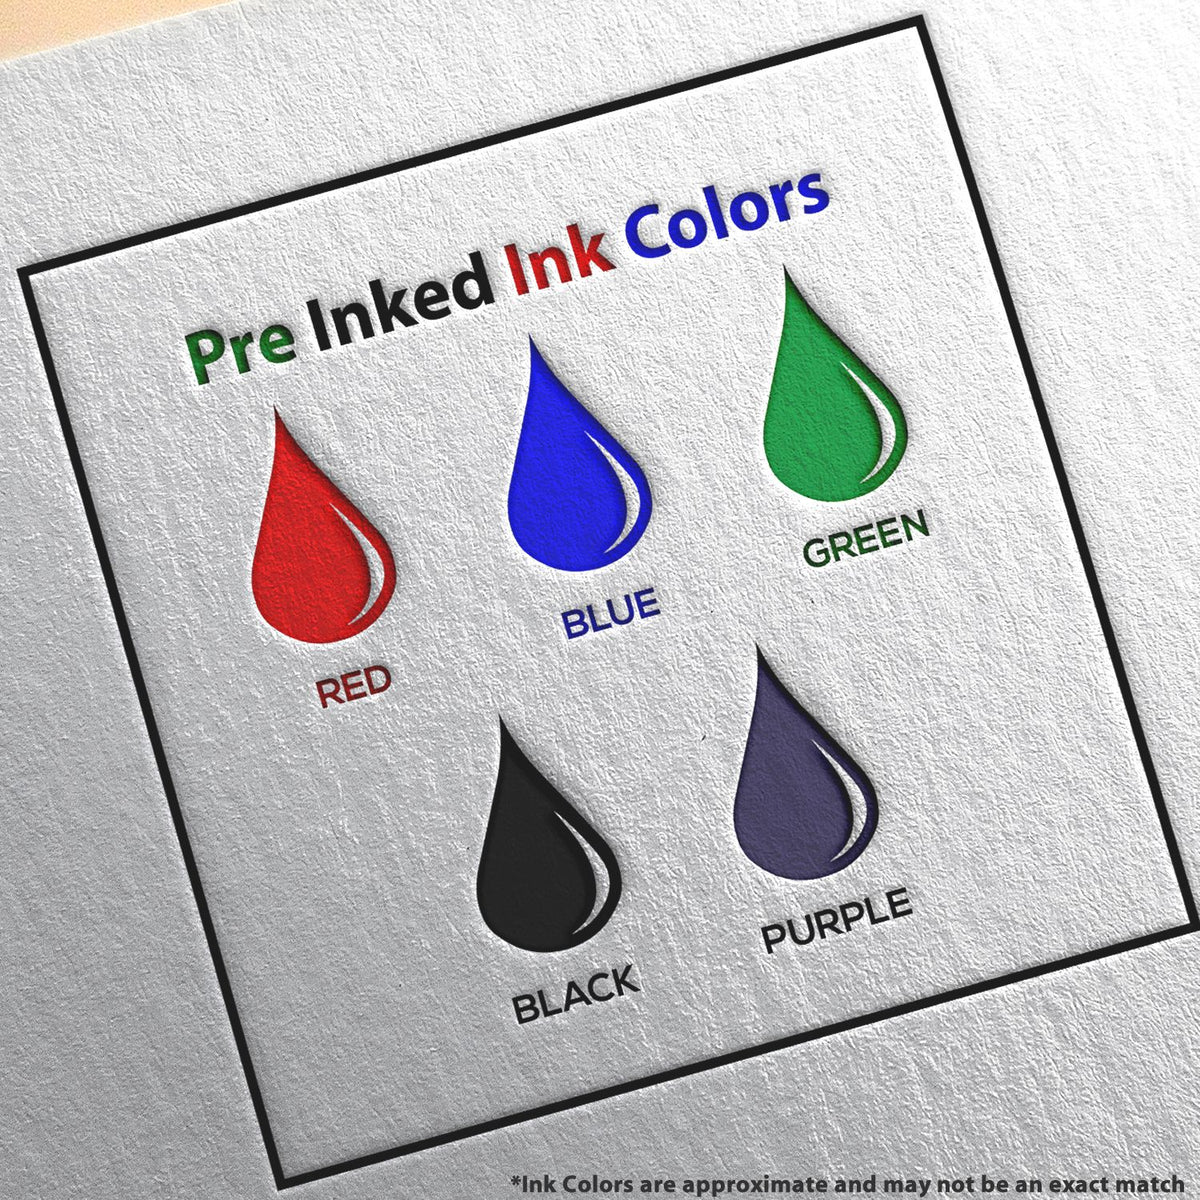 A picture showing the different ink colors or hues available for the MaxLight Premium Pre-Inked Colorado Rectangular Notarial Stamp product.